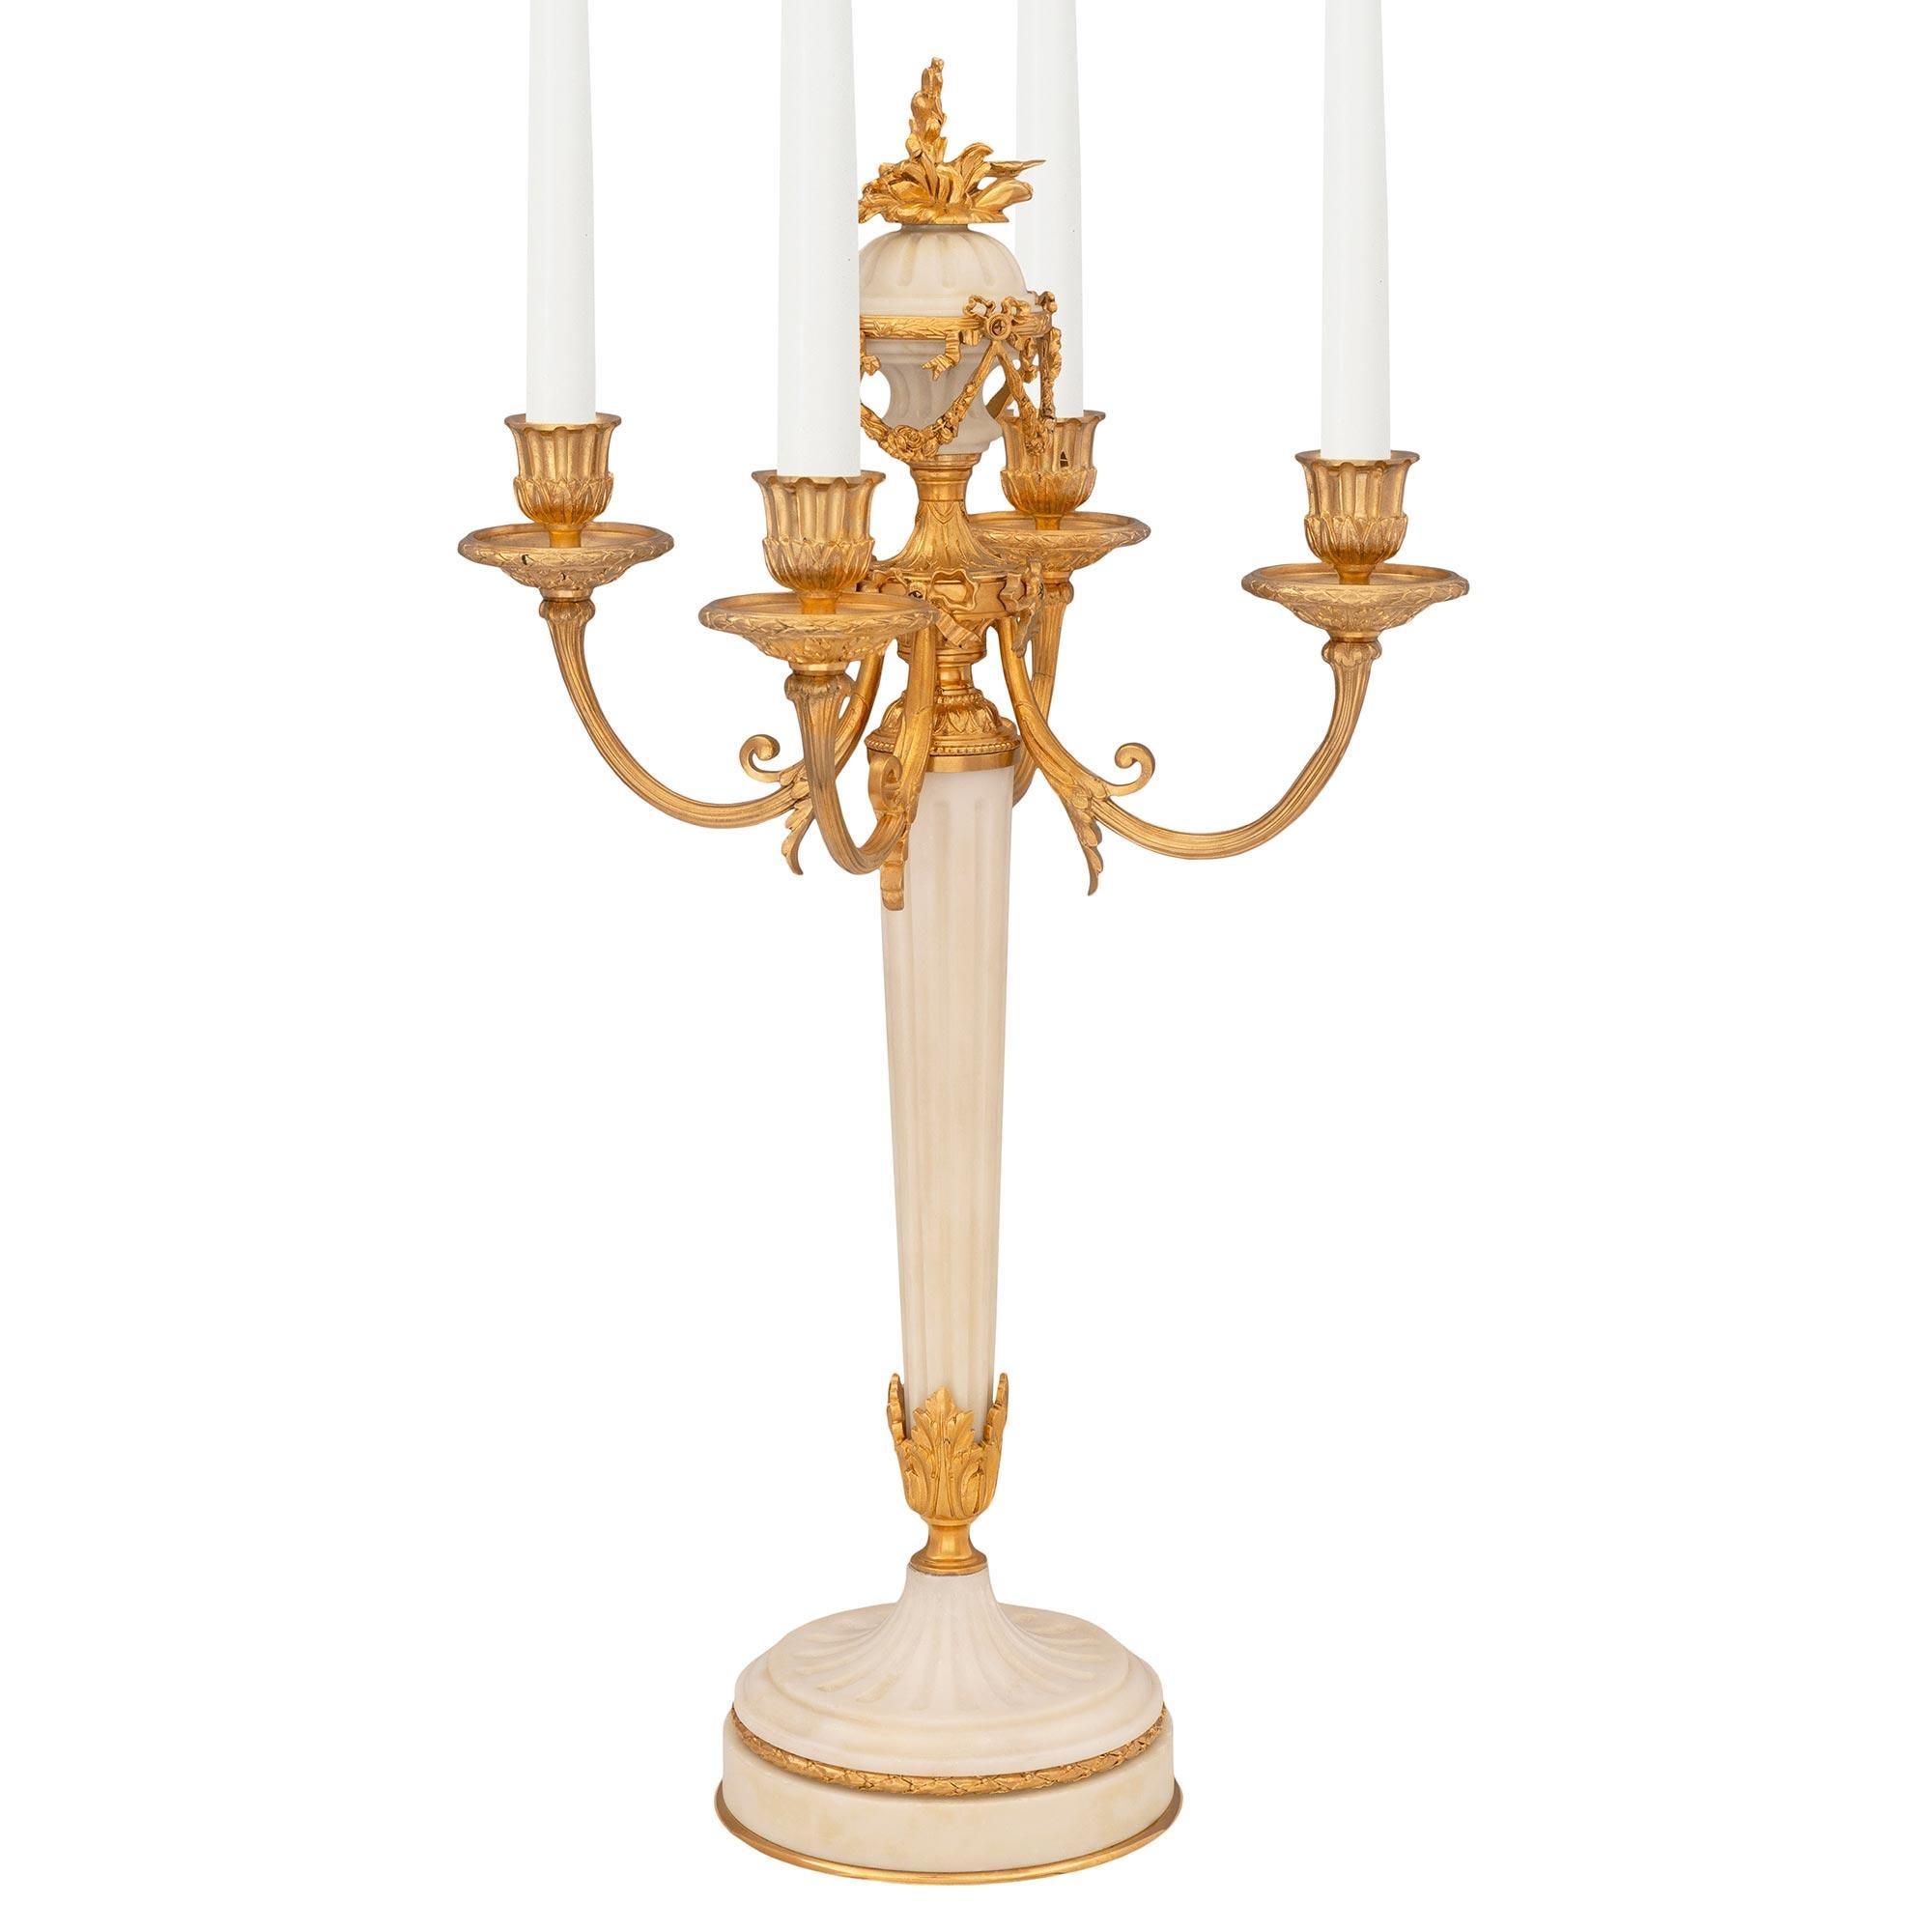 A beautiful and extremely elegant pair of French 19th century Louis XVI st. ormolu and white Carrara marble candelabras. Each unique four arm candelabra is raised by a circular white Carrara marble base with a fine bottom ormolu fillet and a richly